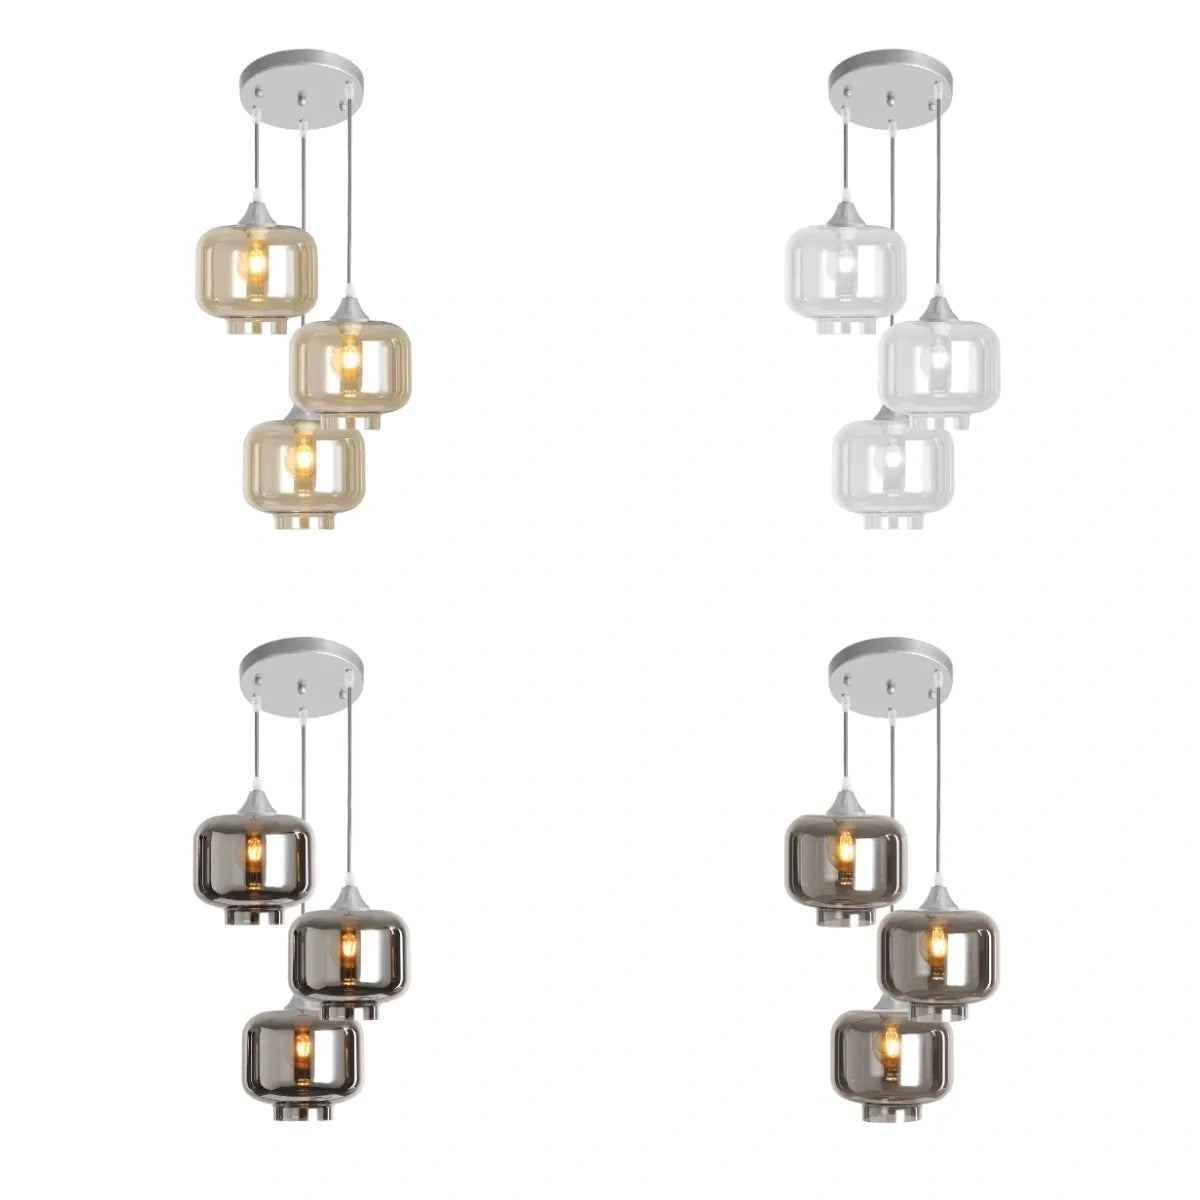 Murano 3 Light Silver Pendant With 3 Round Glass Shades